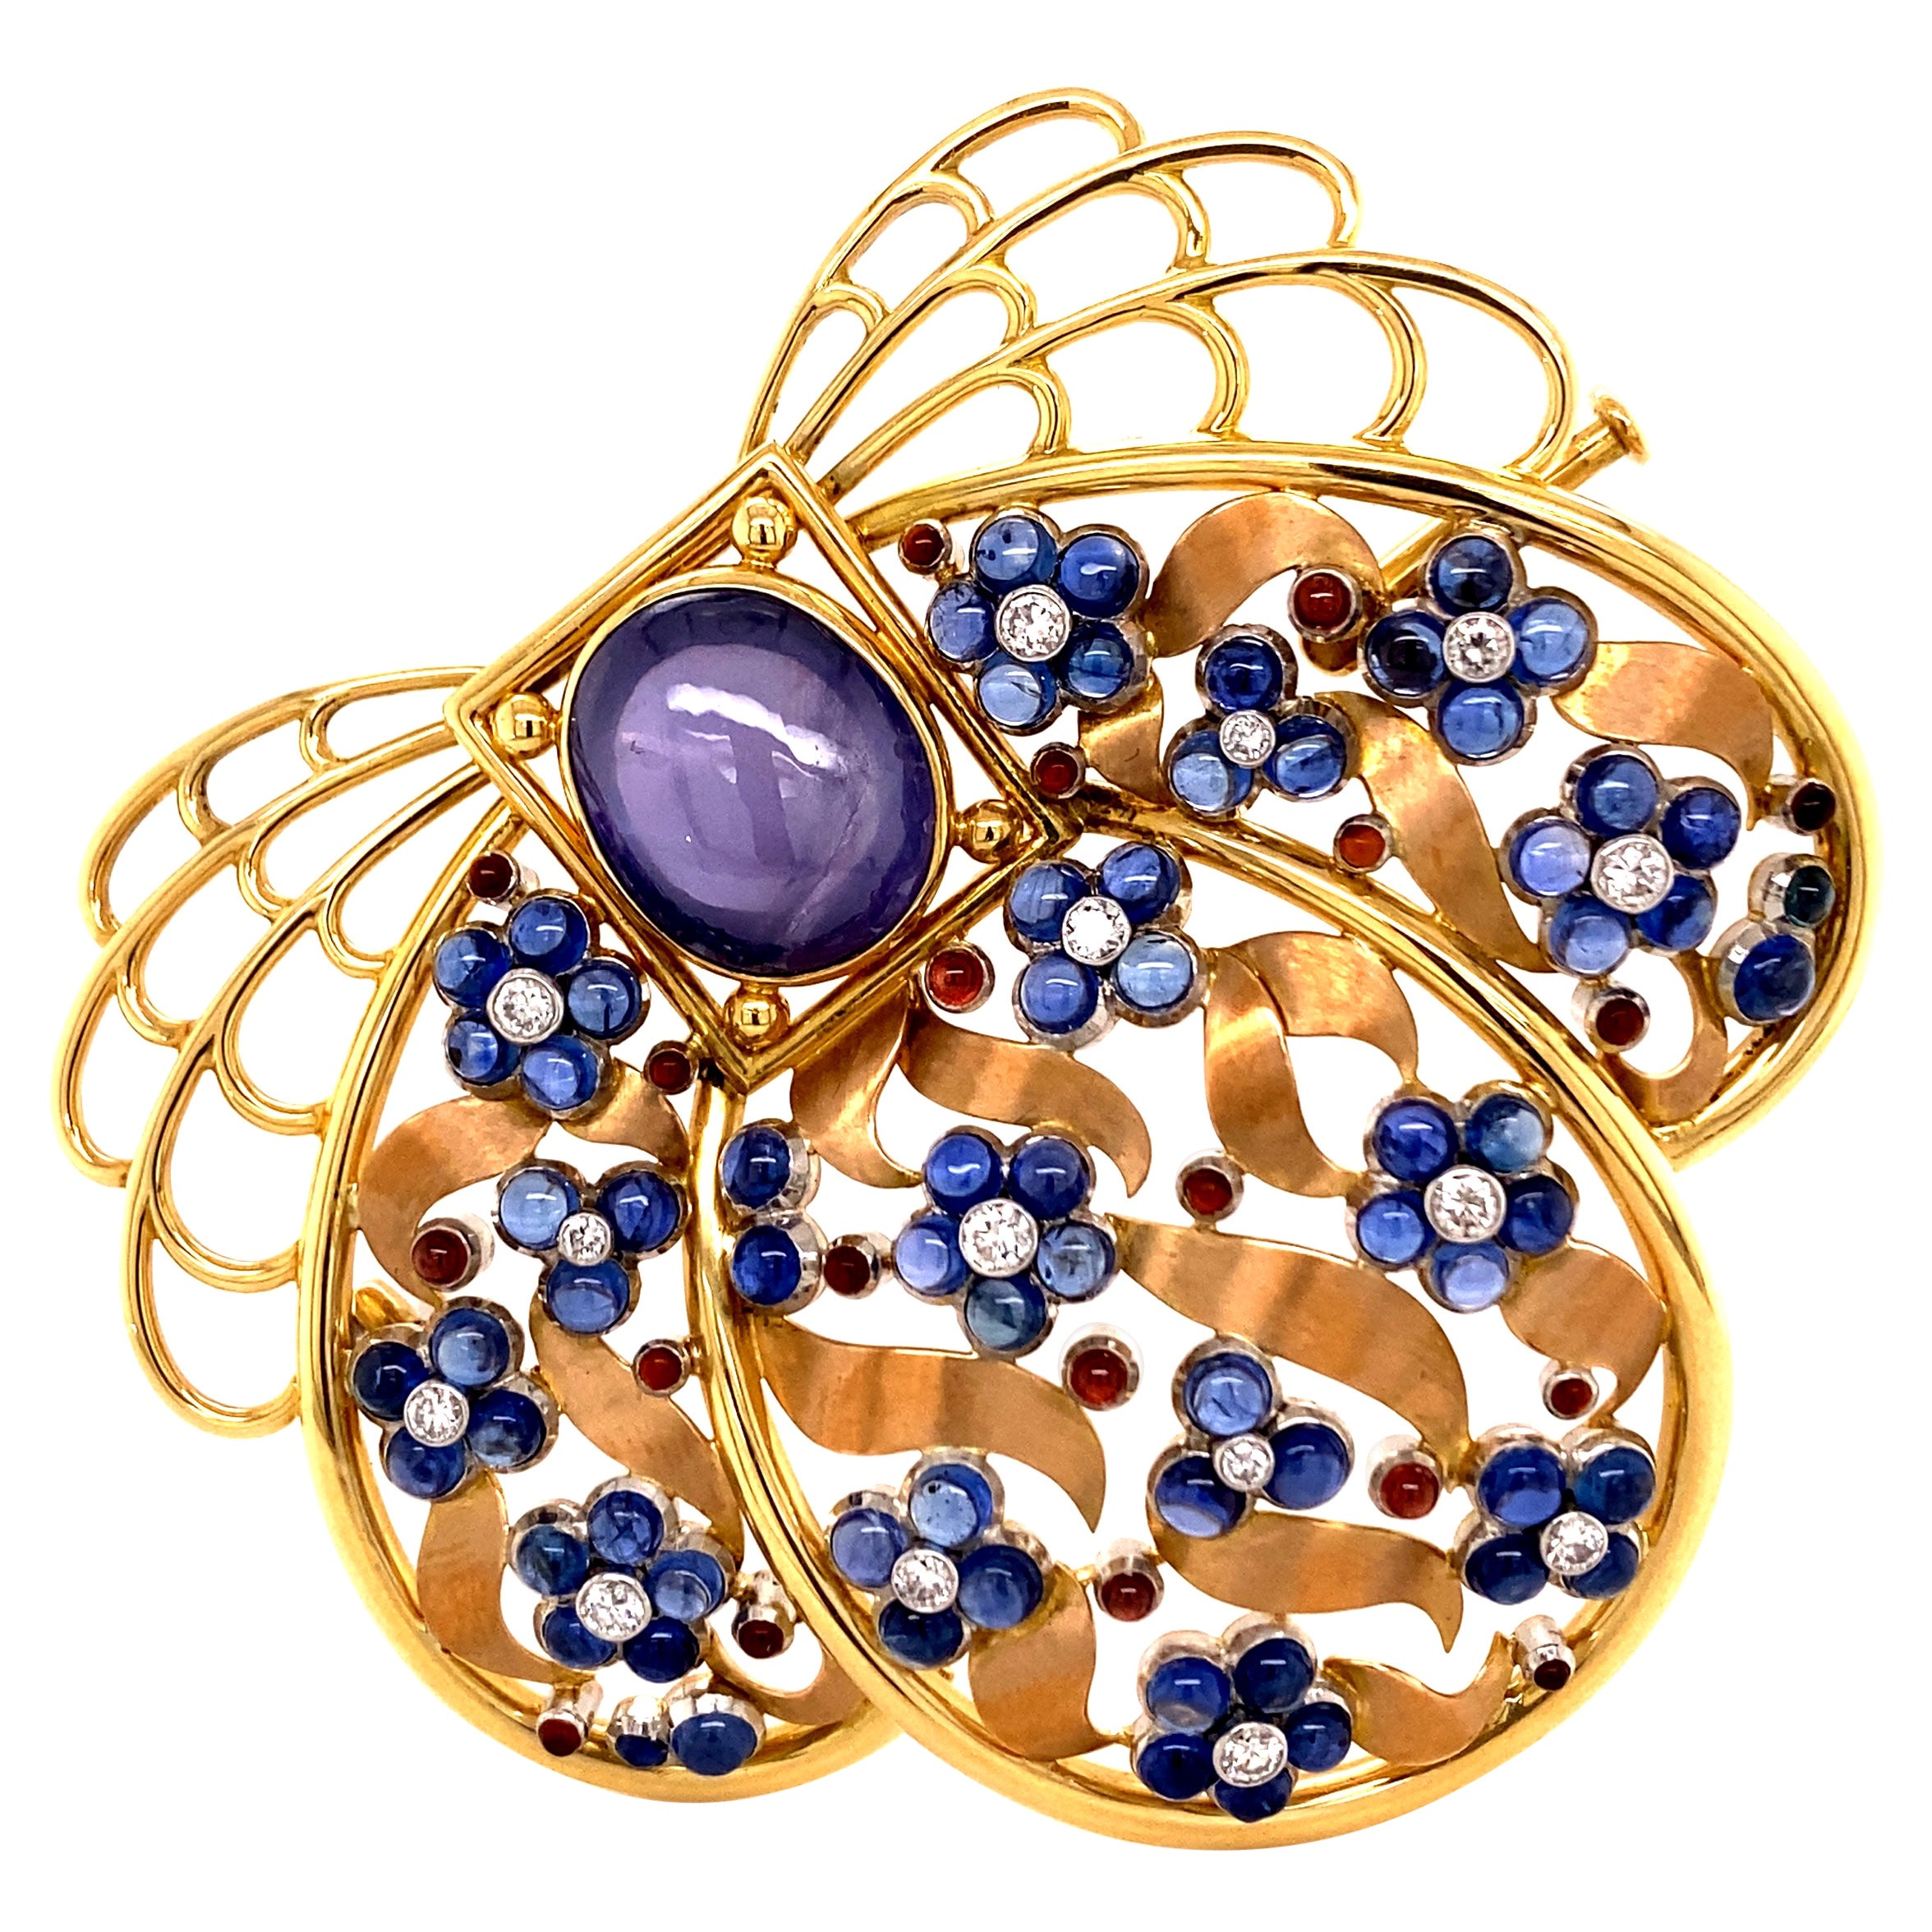 Unique Sapphire and Diamond Brooch by Meister in 18 Karat Gold